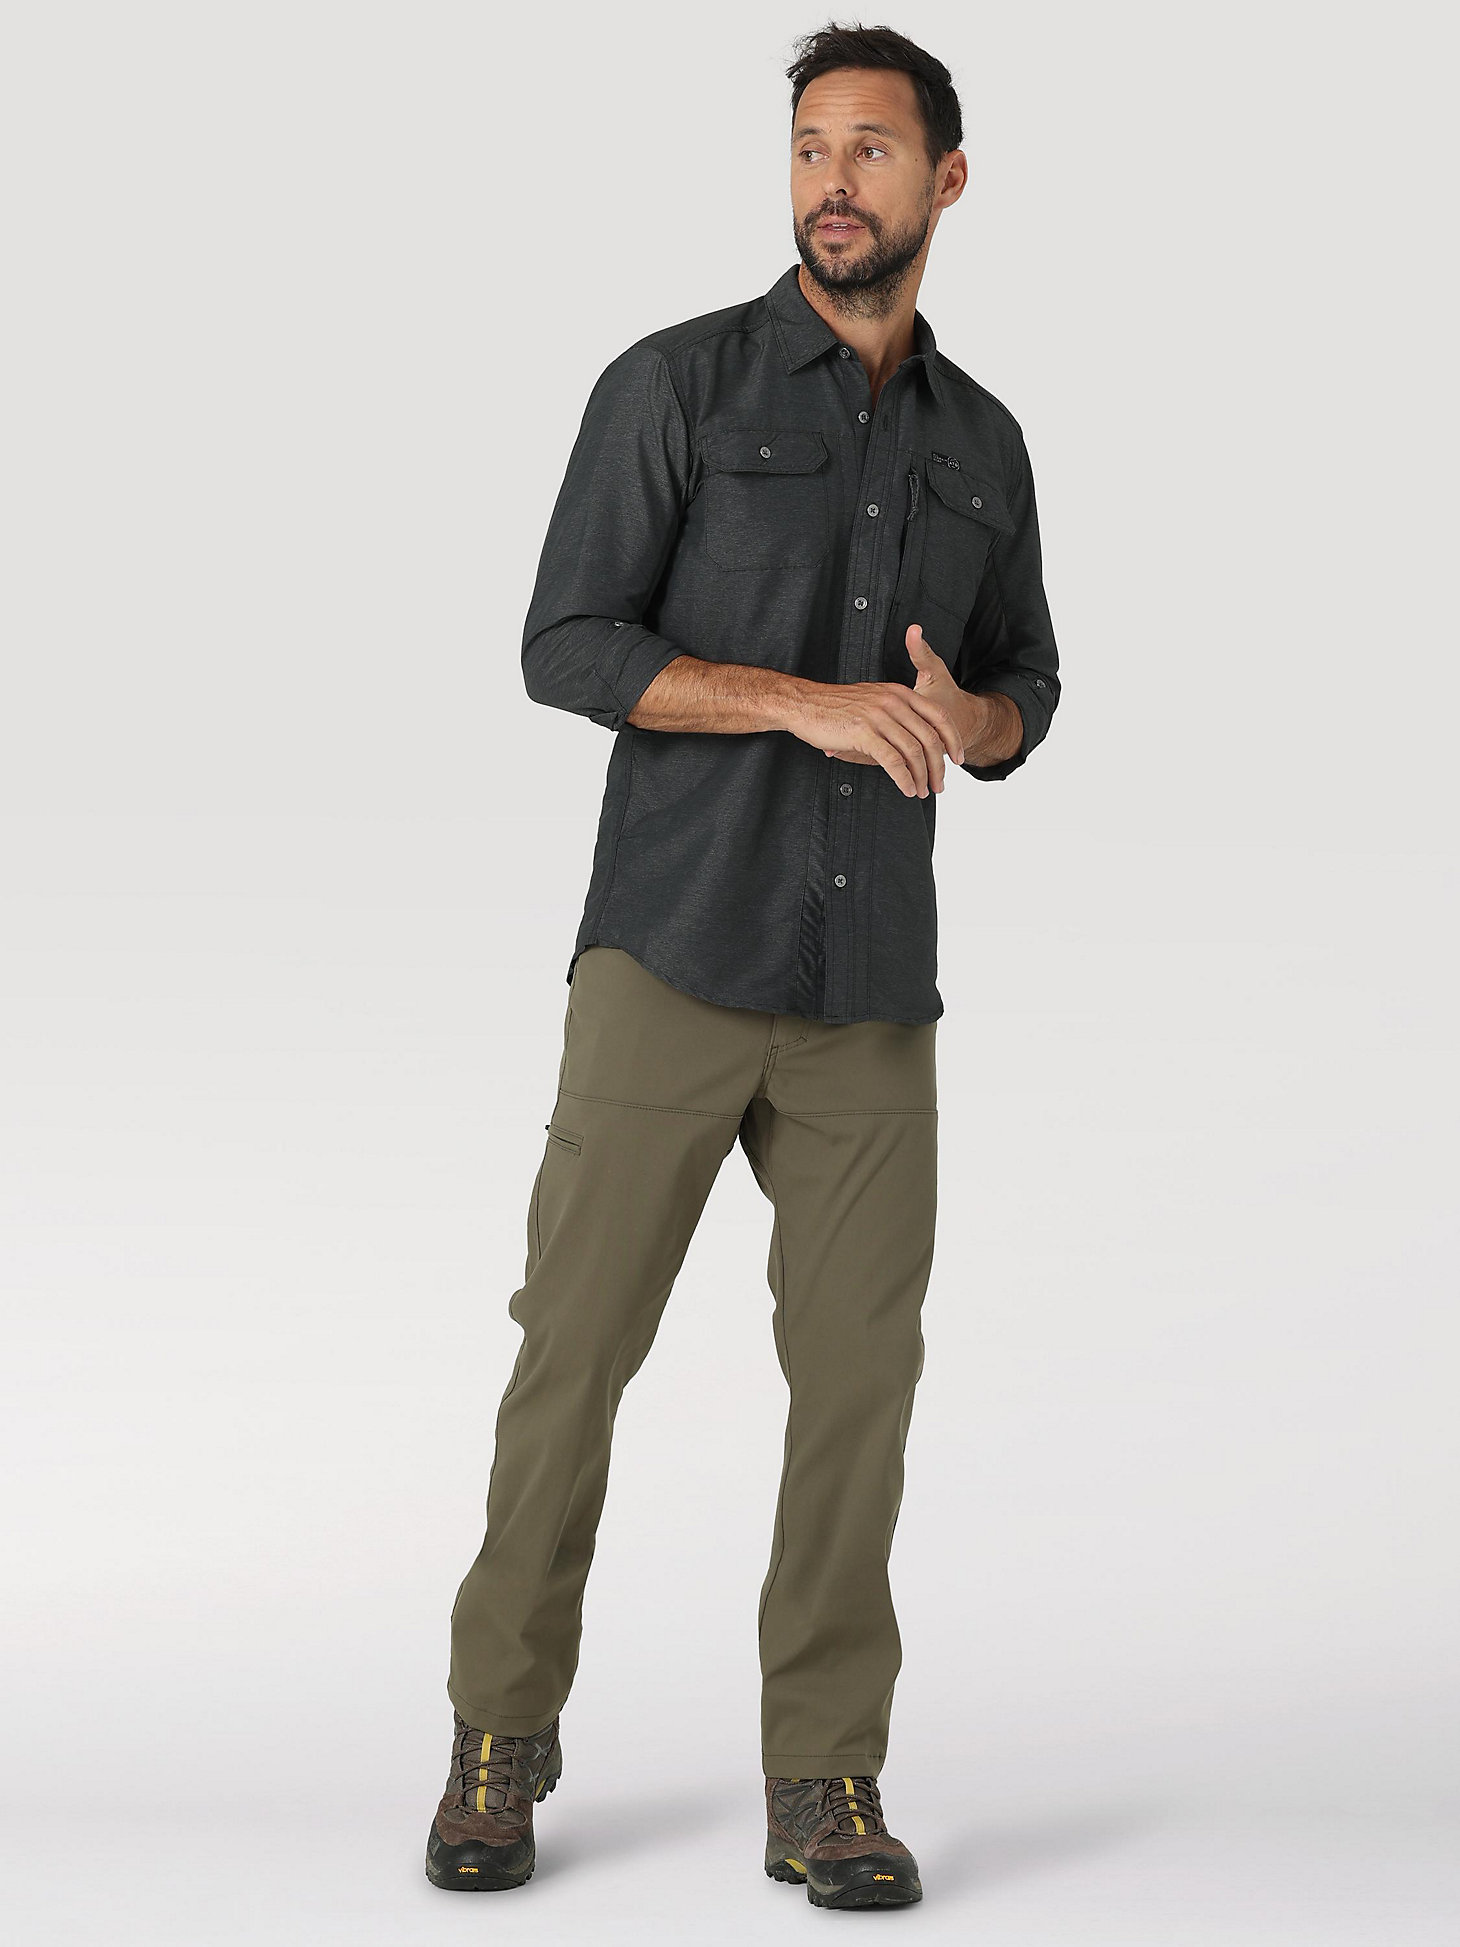 Synthetic Utility Pant in Kelp alternative view 1